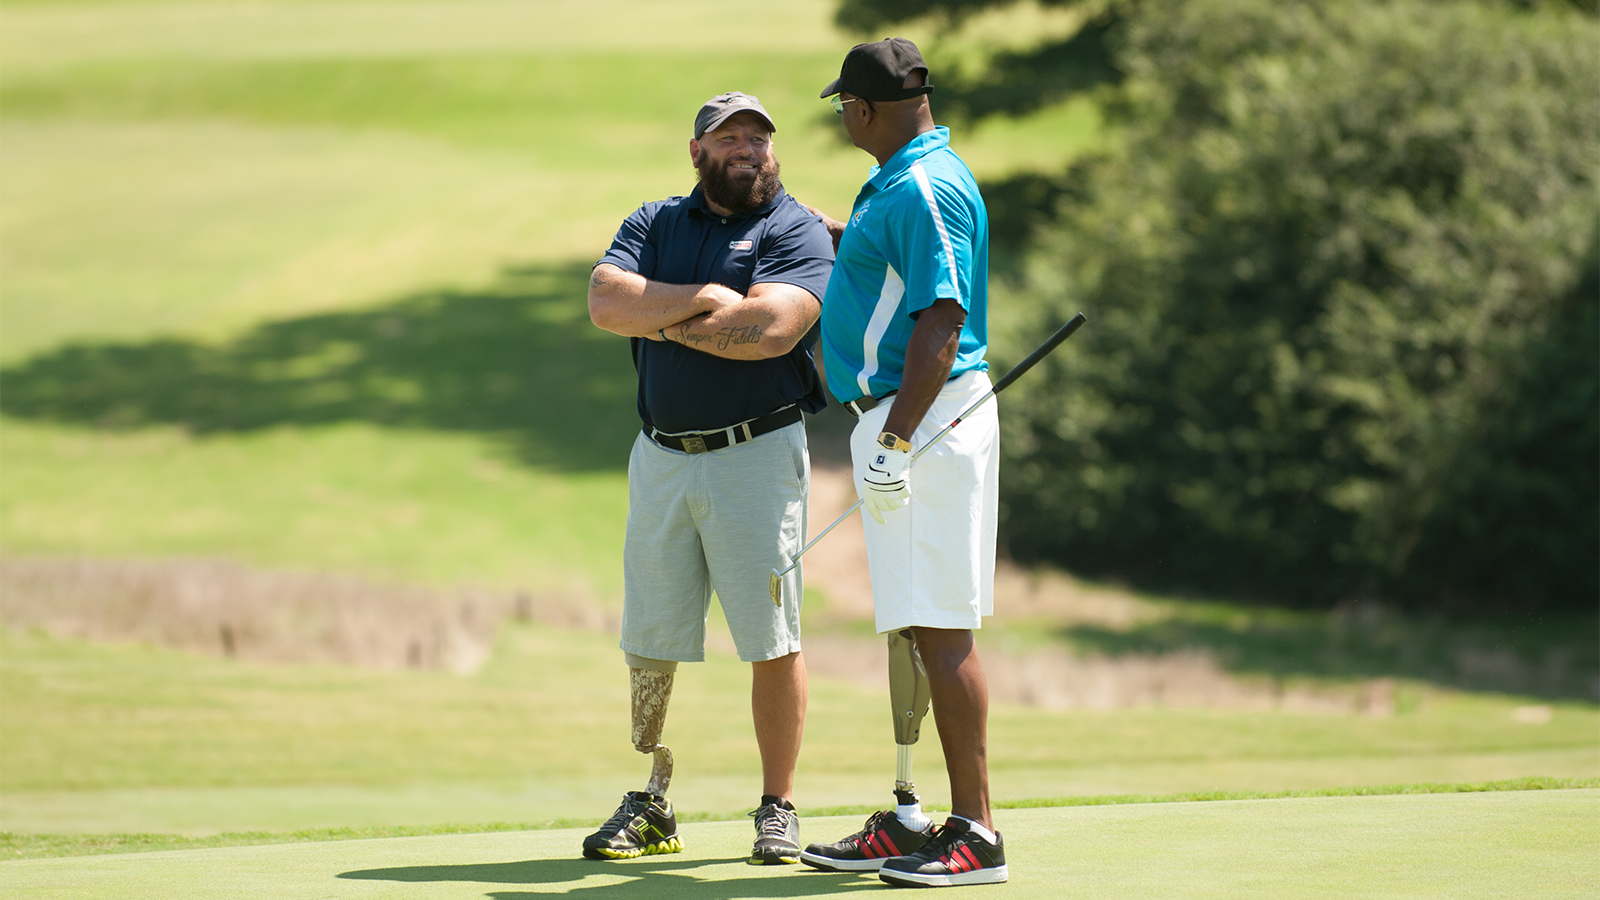 Chris Nowak with a contestant during the Secretary's Cup held at Charlotte Country Club in Charlotte, North Carolina. (Montana Pritchard/PGA of America)